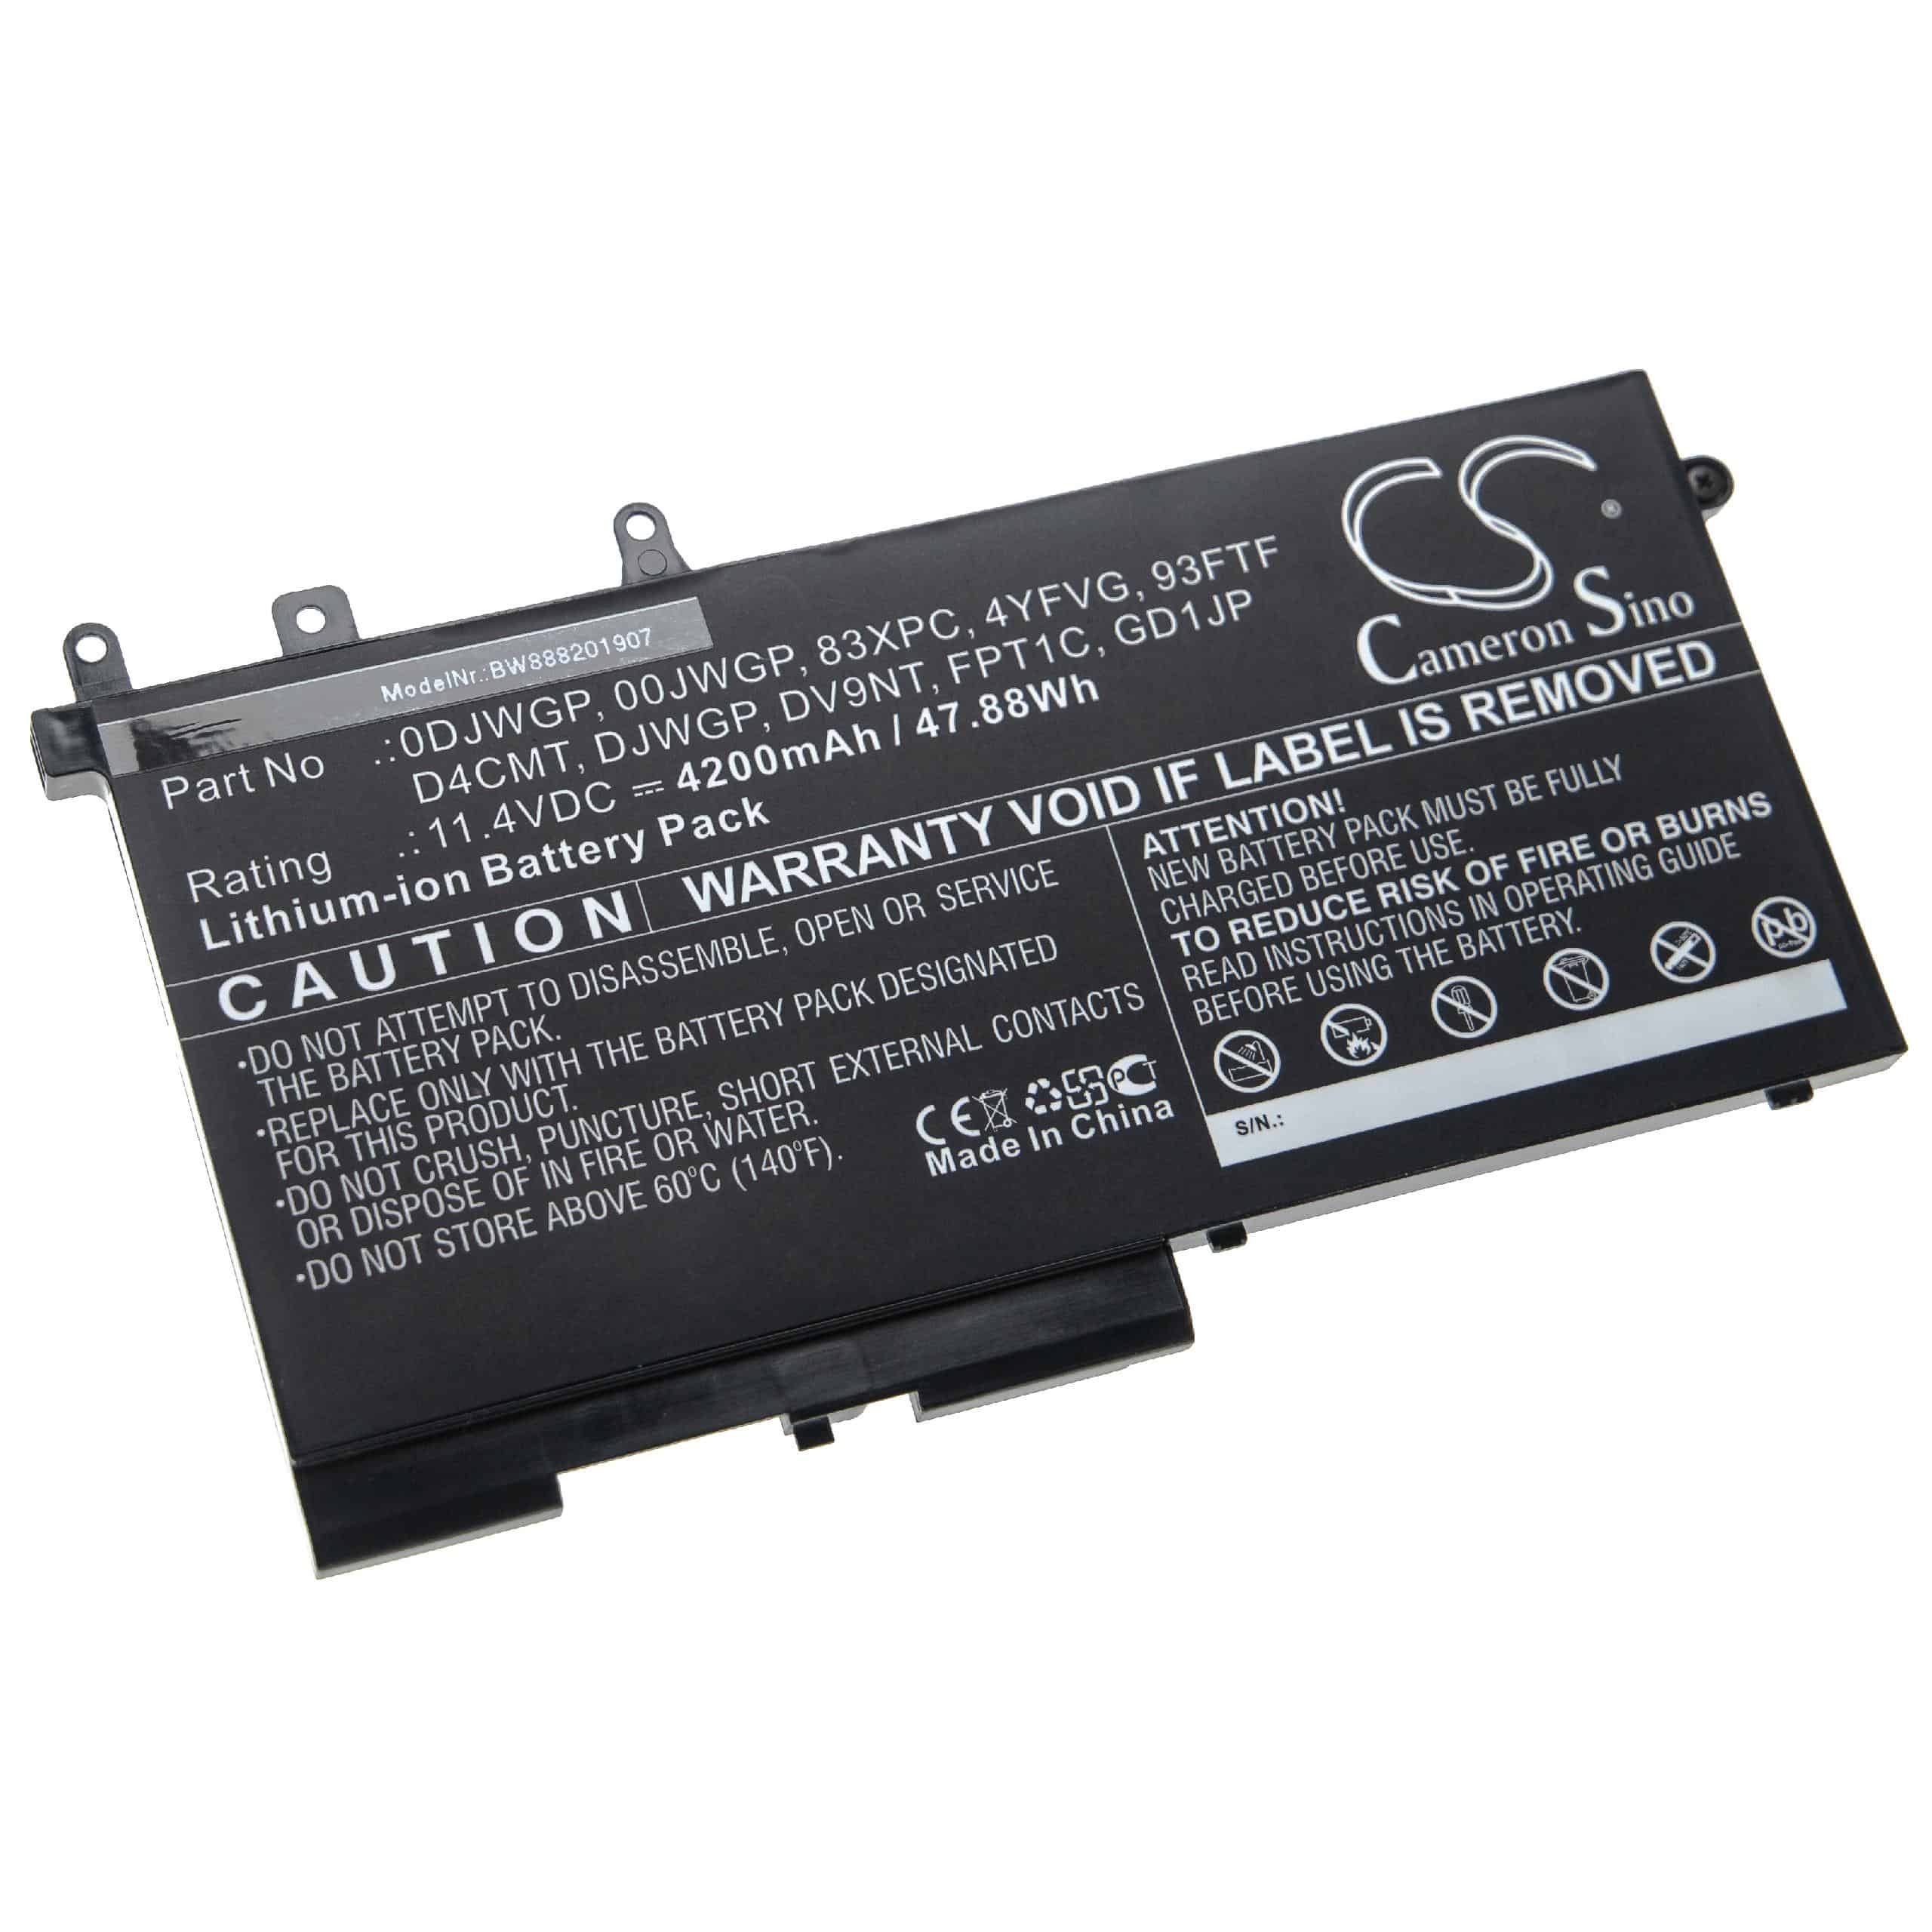 Notebook Battery Replacement for Dell 83XPC, 0DJWGP, 3DDDG, 00JWGP, D4CMT, 93FTF, 4yfvg - 4200mAh 11.4V Li-Ion